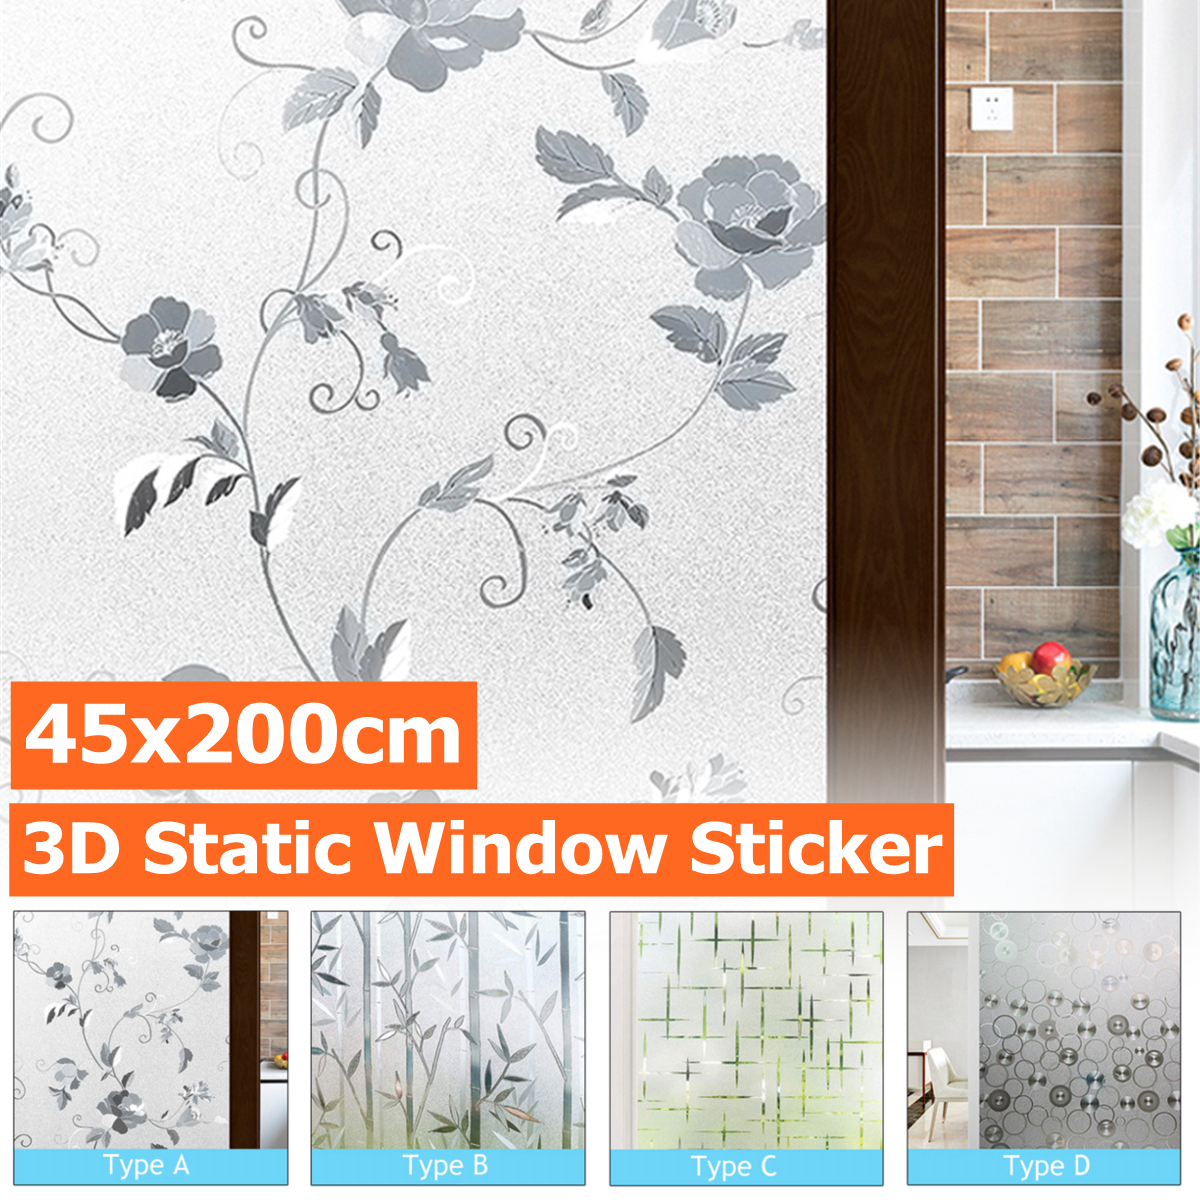 Static-Cling-Glueless-Reusable-Removable-Privacy-Frosted-Decor-Window-Glass-Film-1824221-1